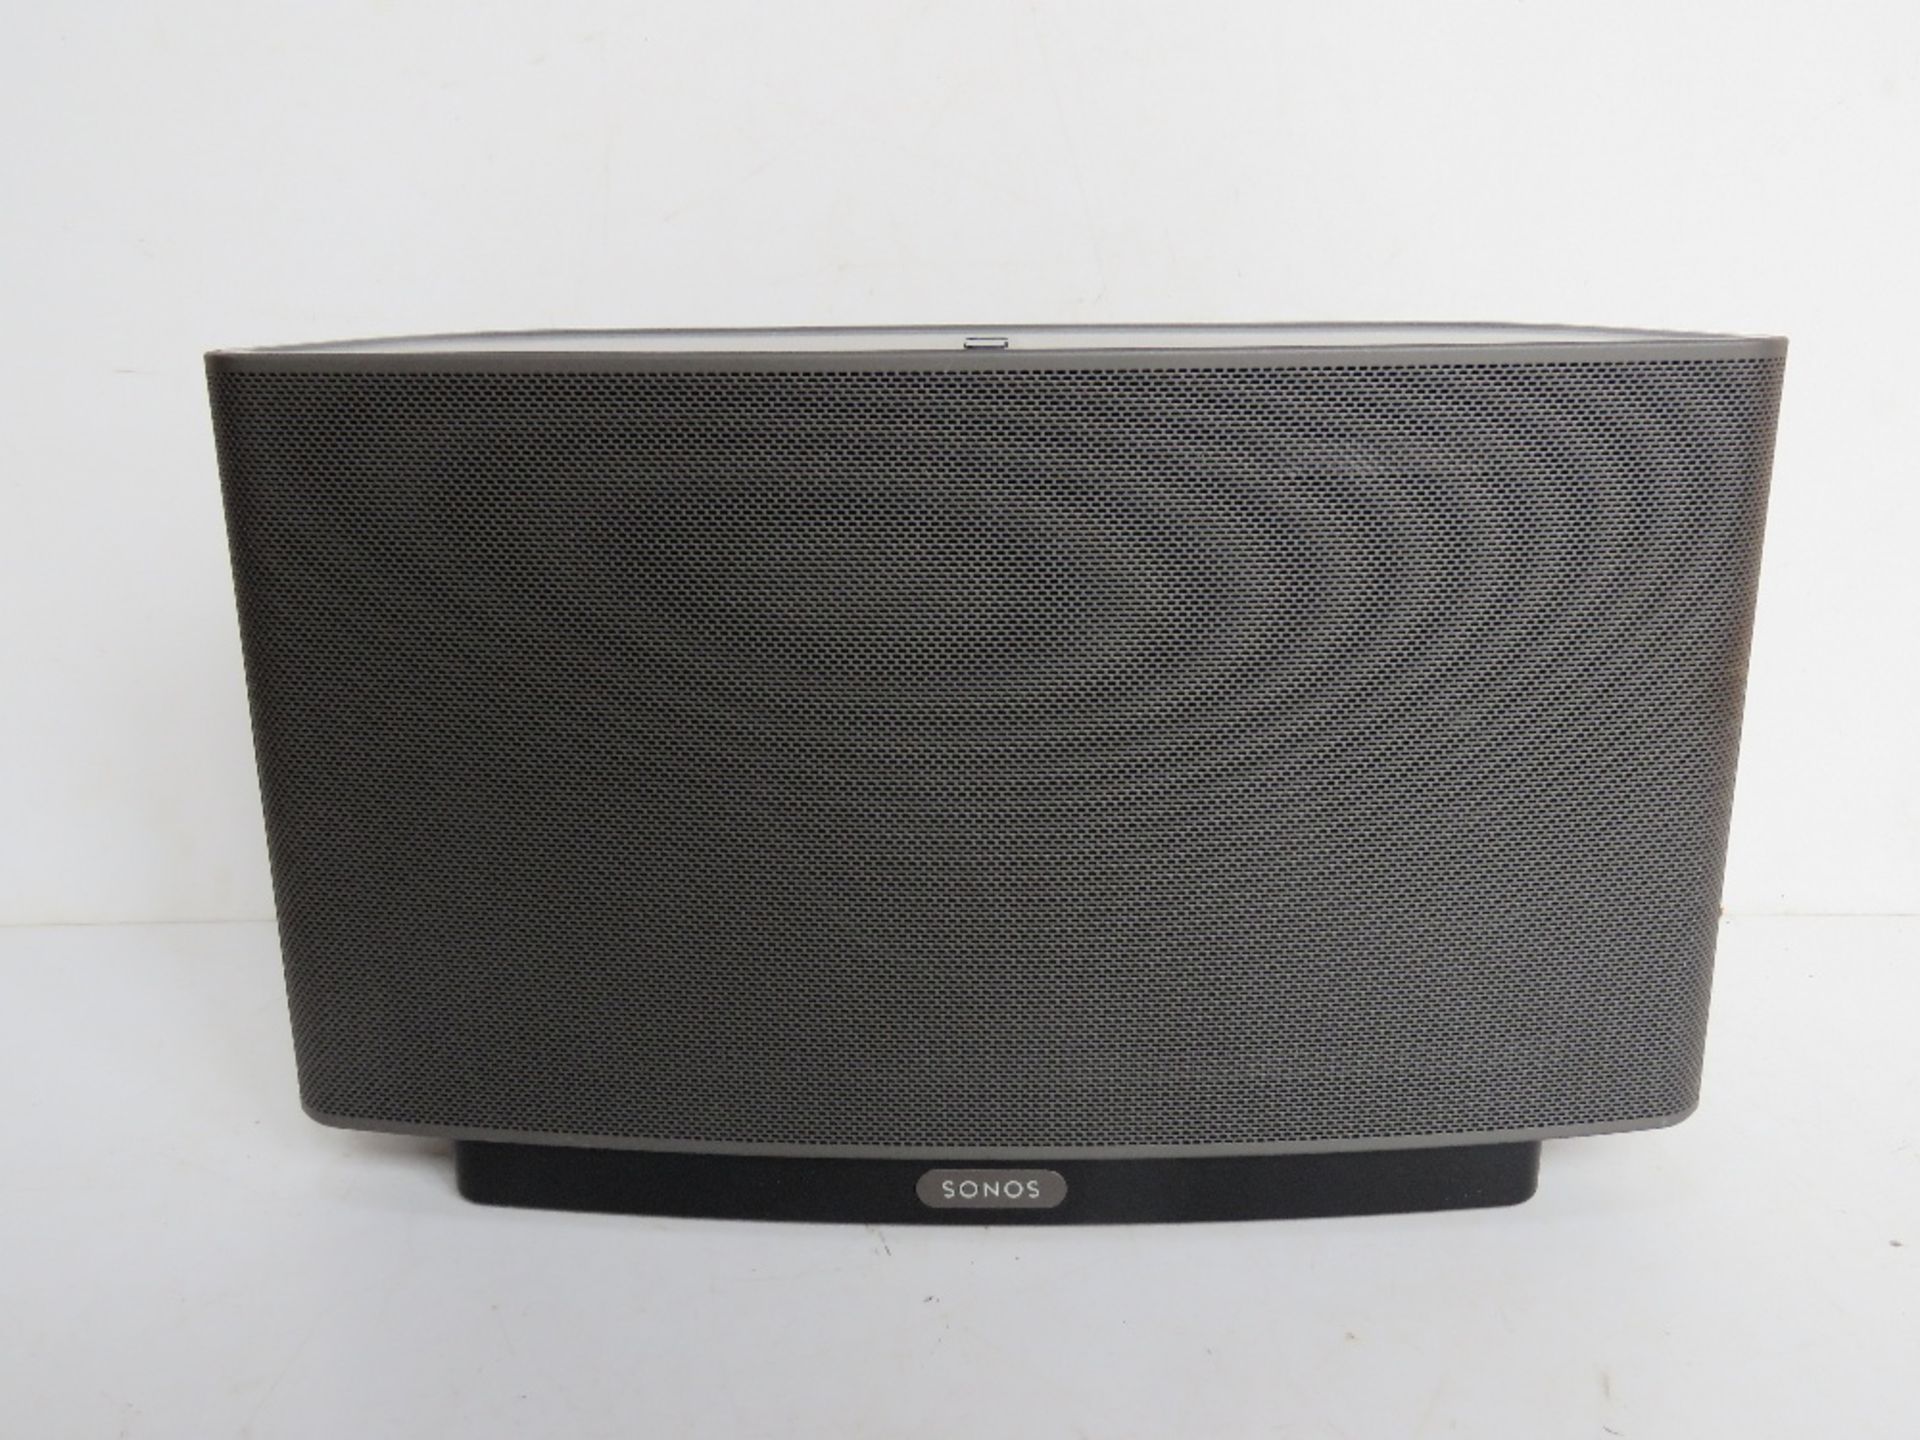 A Sonos Play5 speaker. No cable.